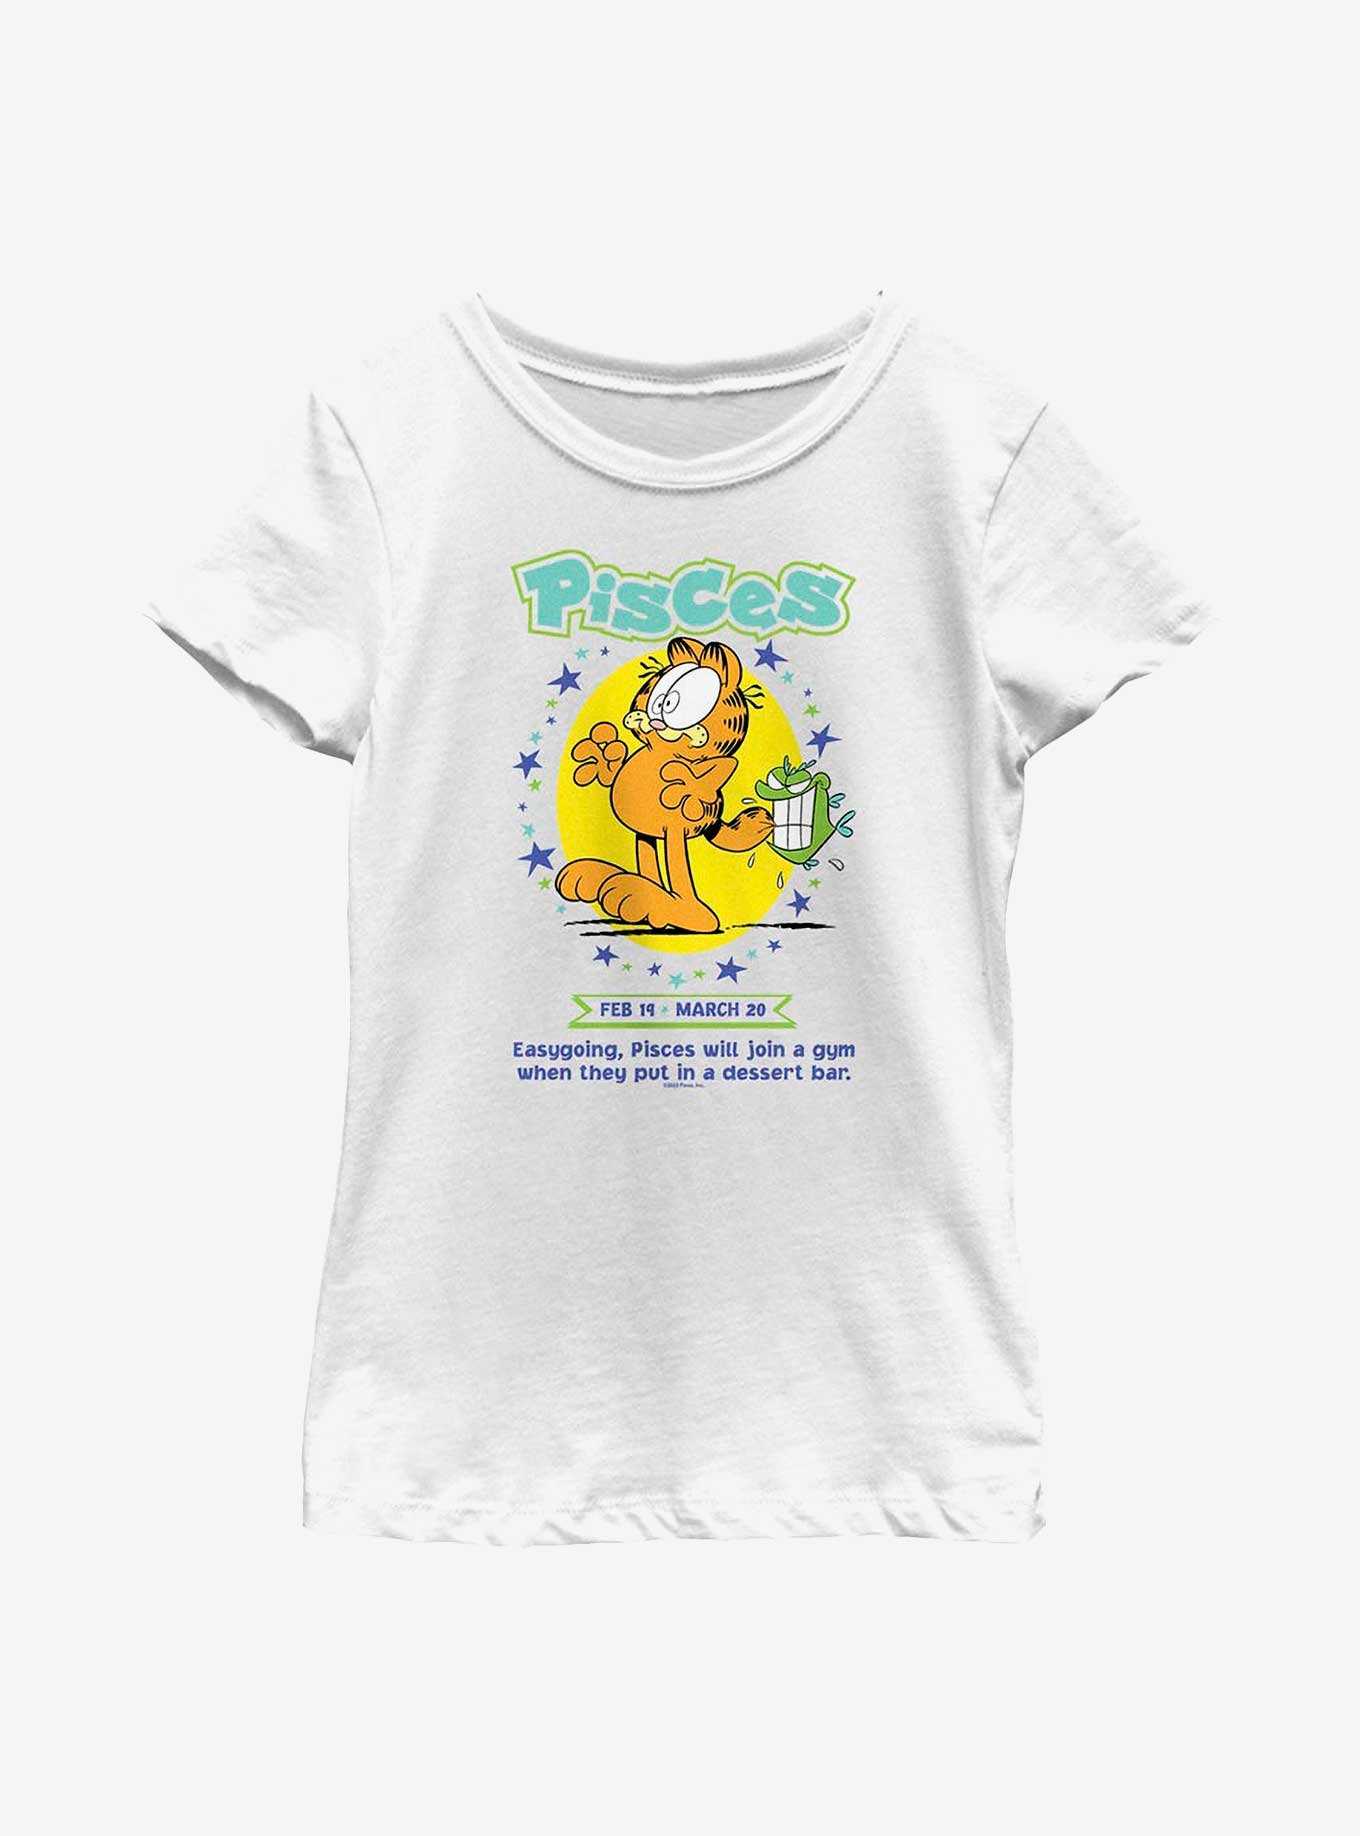 Garfield Pisces Horoscope Youth Girl's T-Shirt, , hi-res